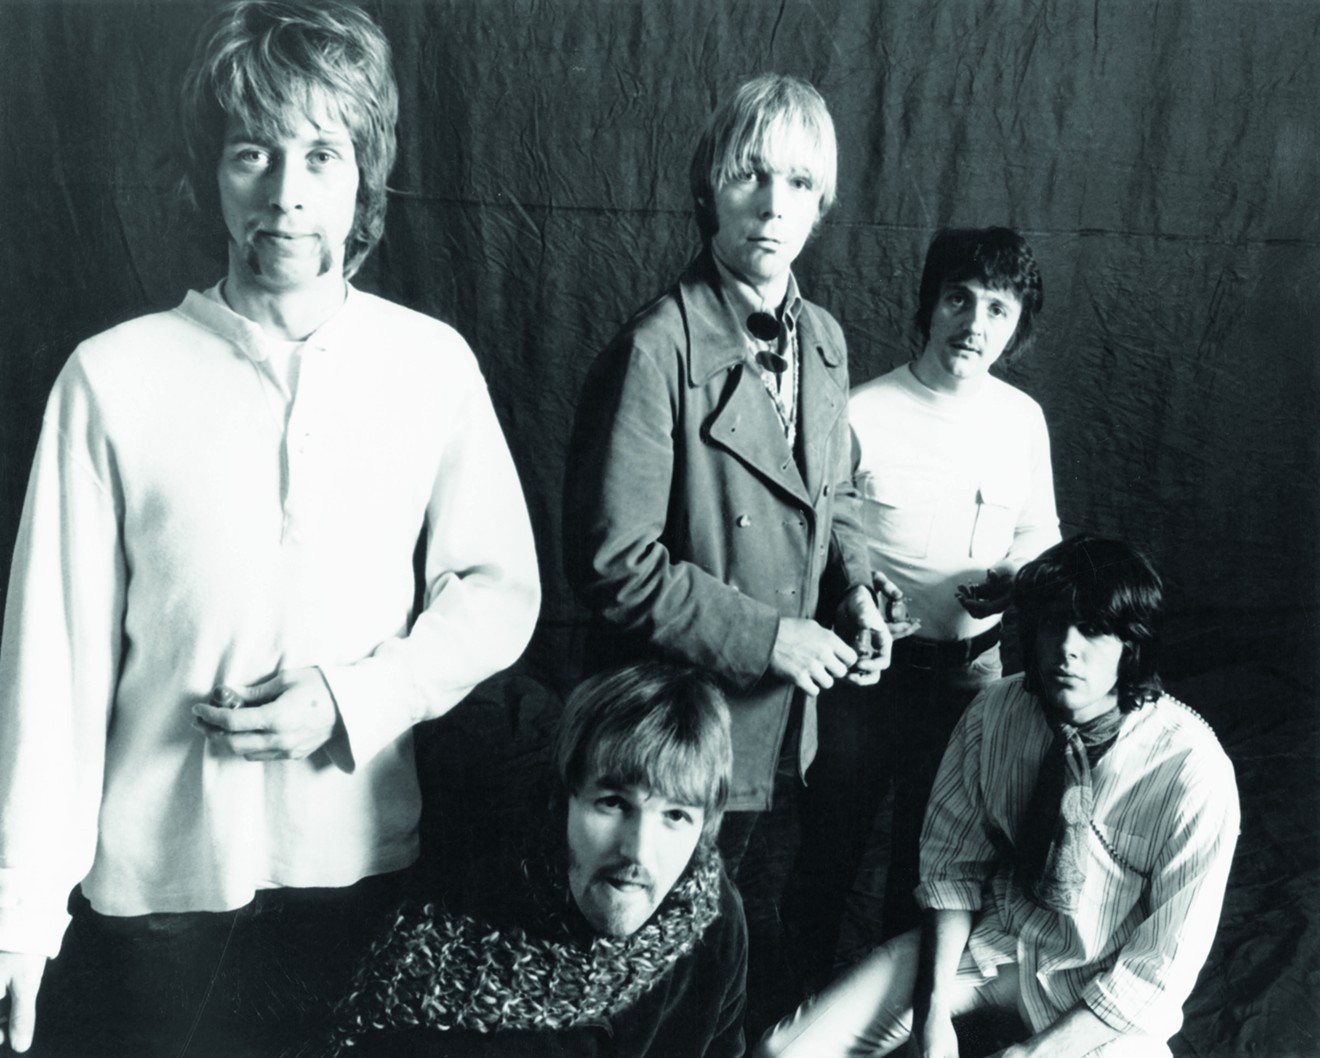 The Men of Moby Grape: Skip Spence, Jerry Miller (seated), Bob Mosley, Don Stevenson, and Peter Lewis.